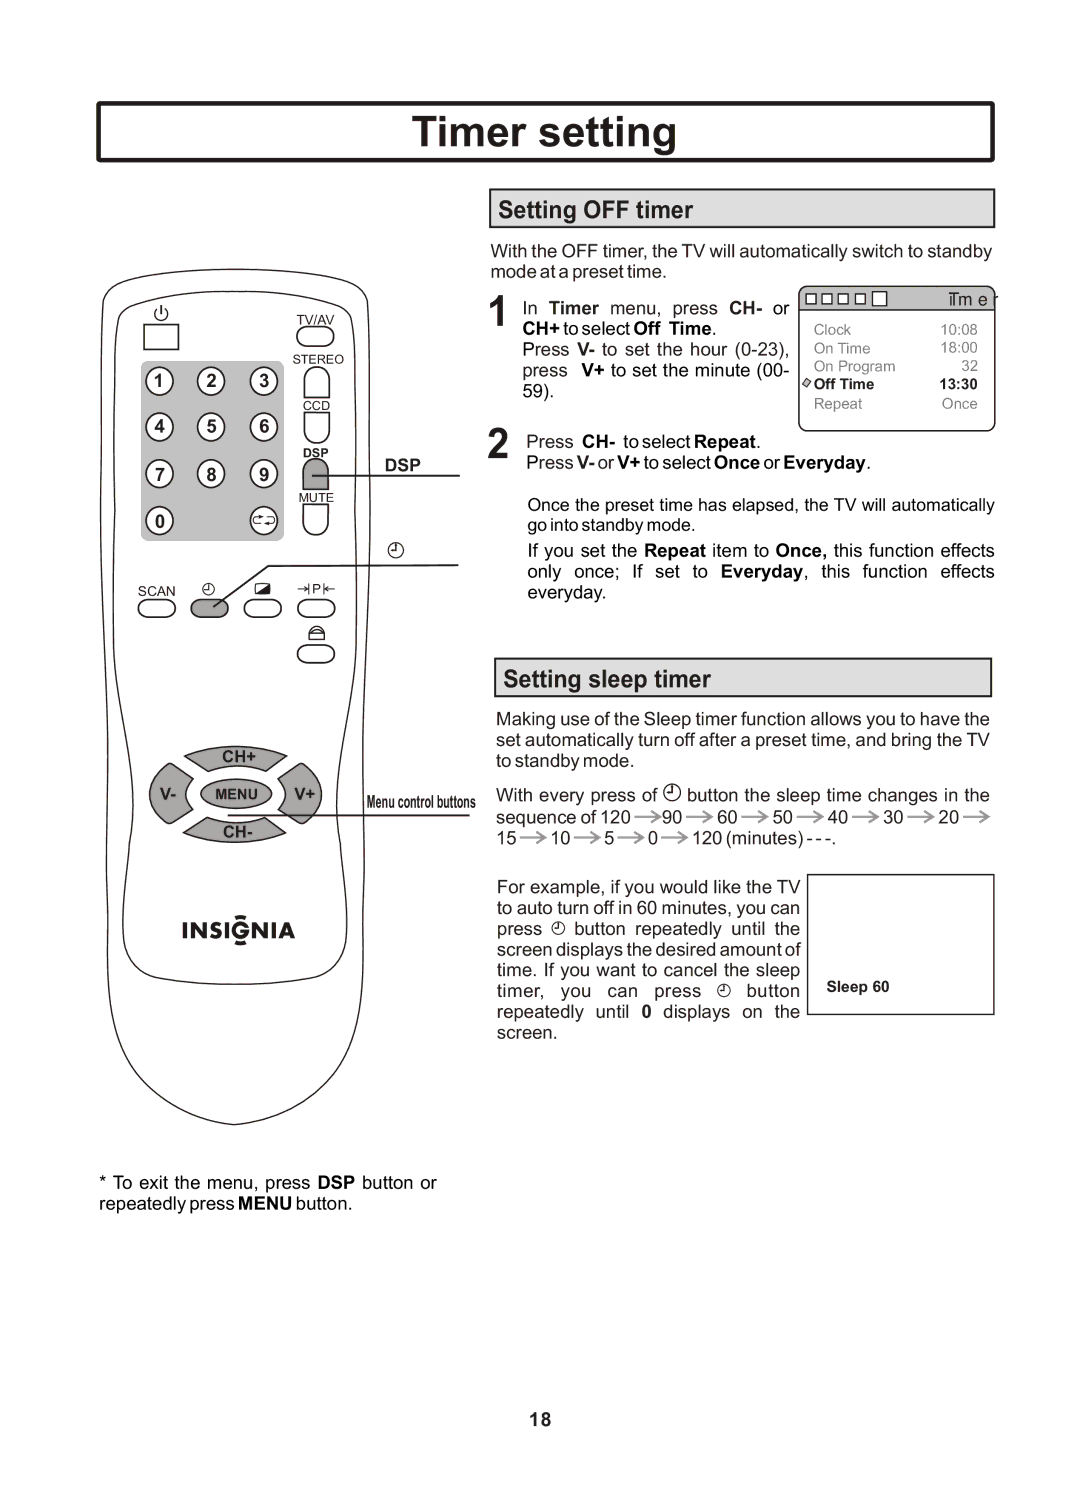 Insignia IS-TV040922 user manual Setting OFF timer, Setting sleep timer 